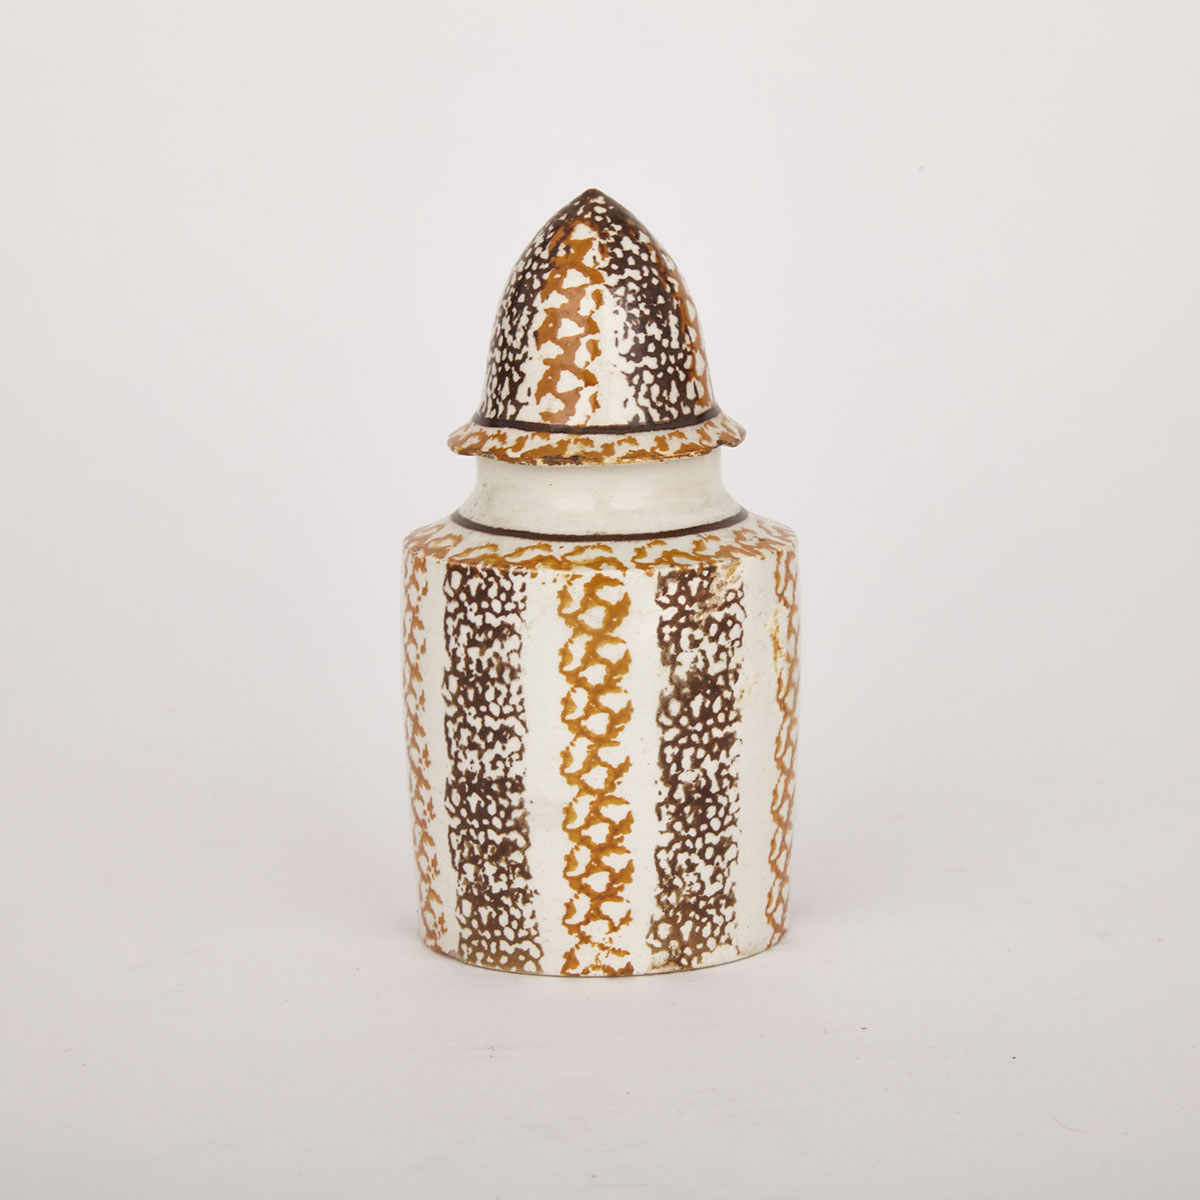 English Whieldon-Type Pearlware Tea Caddy and Cover,  c.1775-80